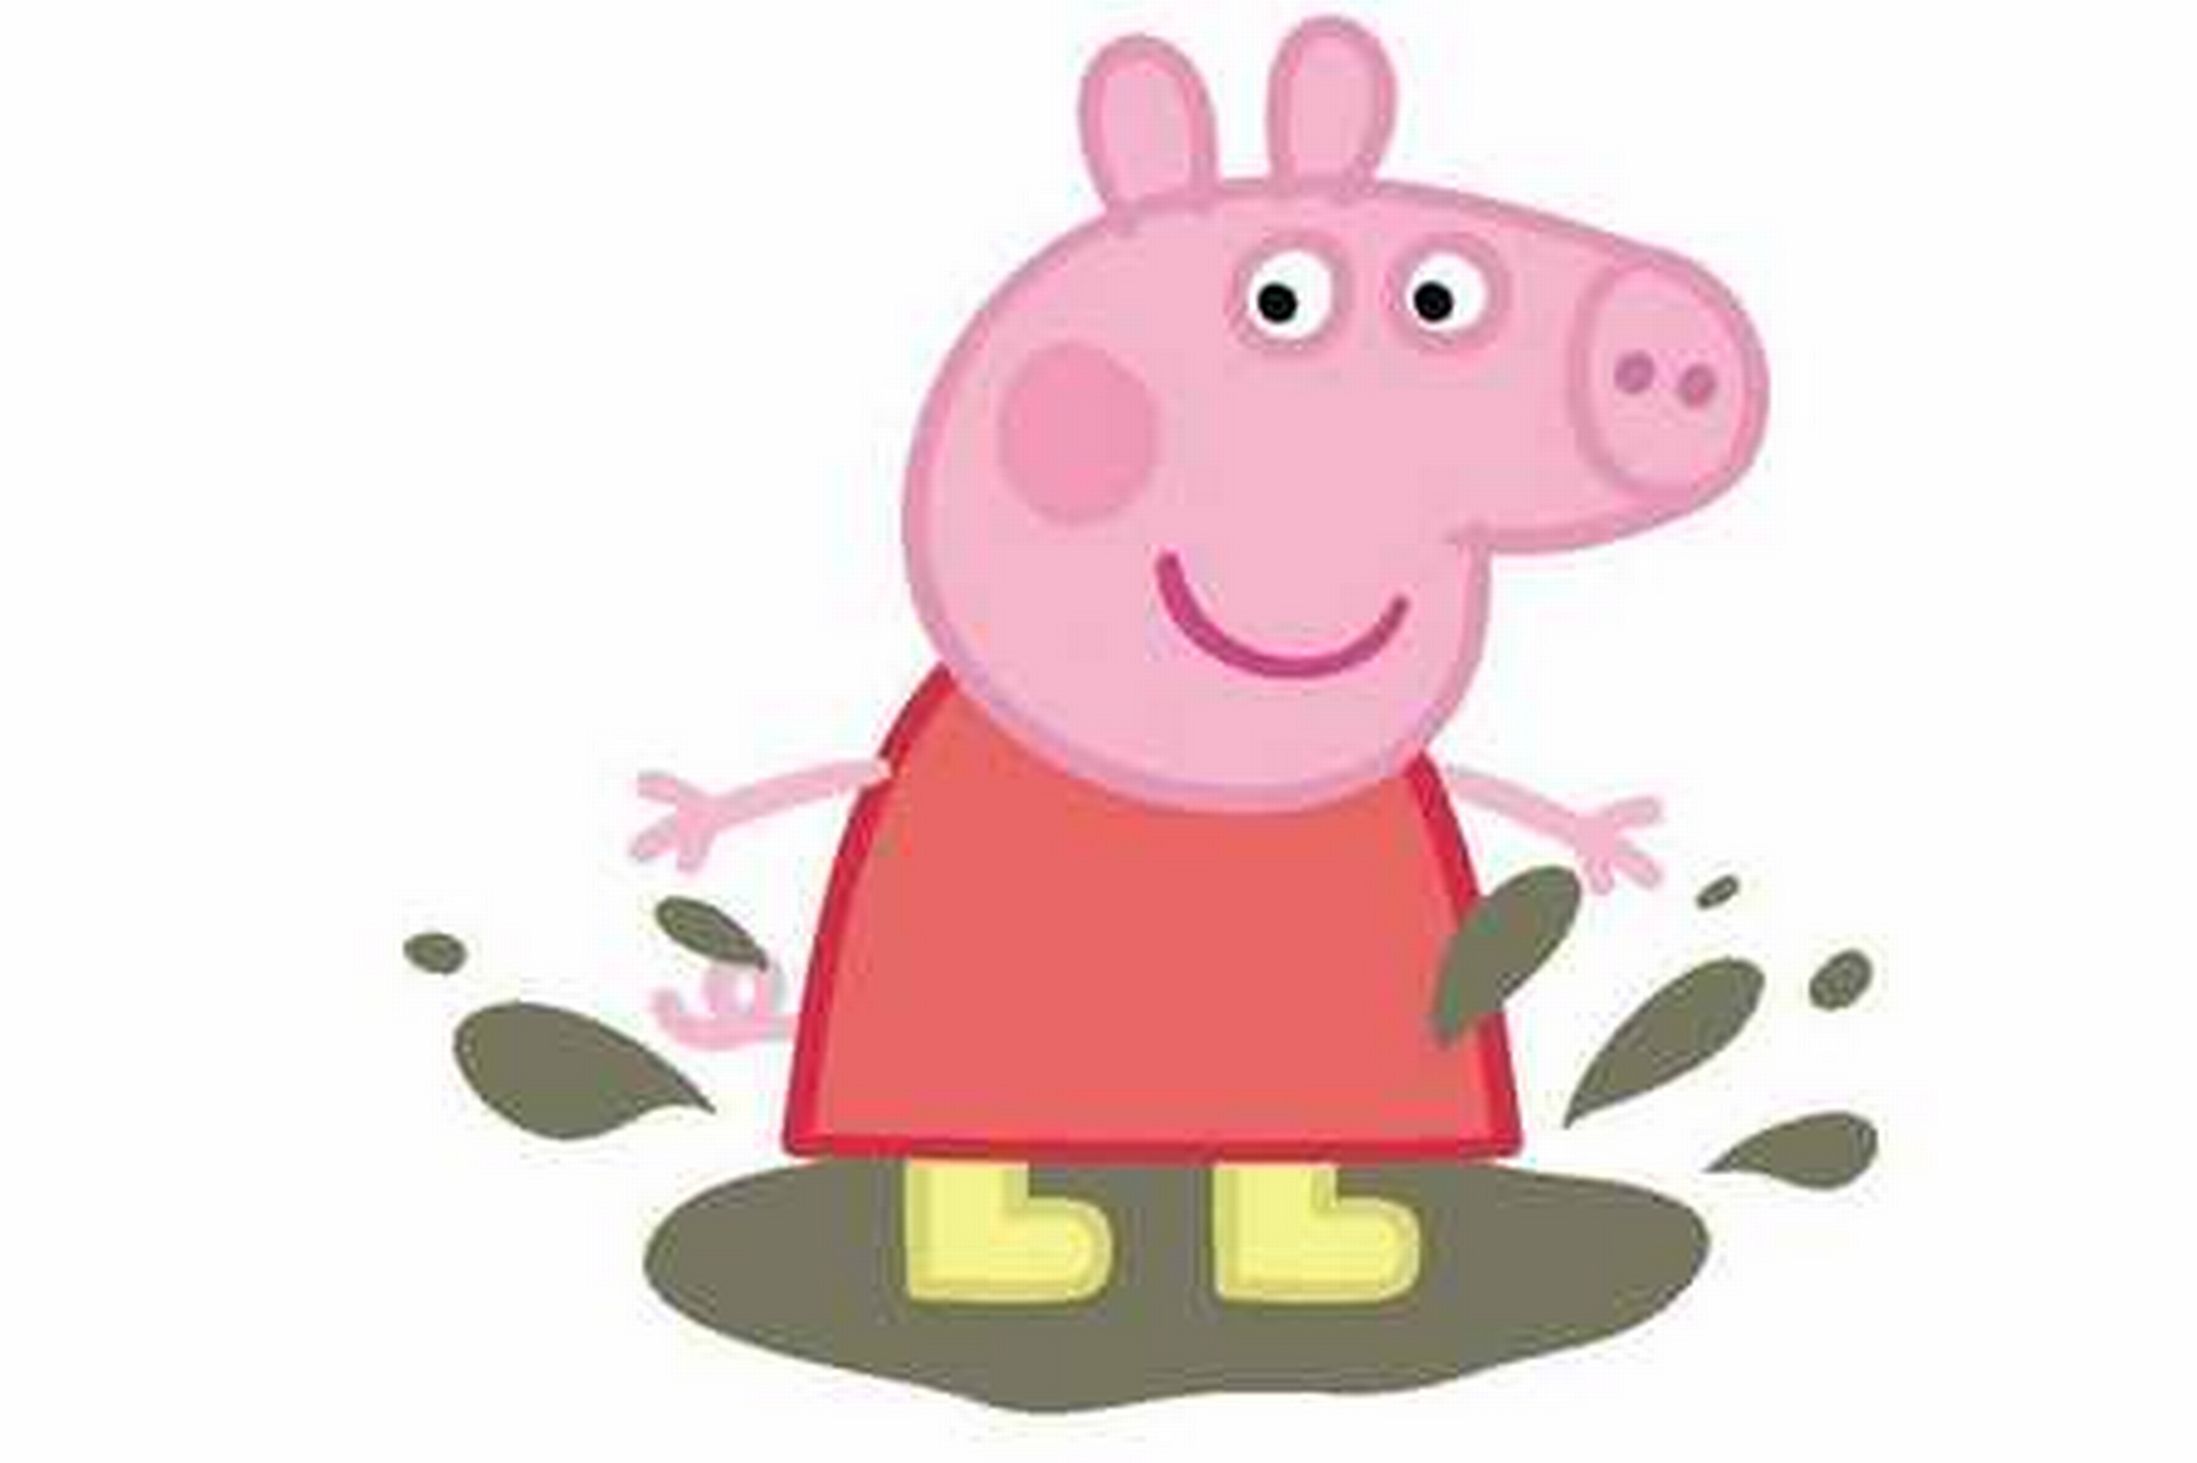 Peppa Pig Natale.Babbo Natale E Peppa Pig Al Policlinico Umberto I Ditutto Official Site Italy